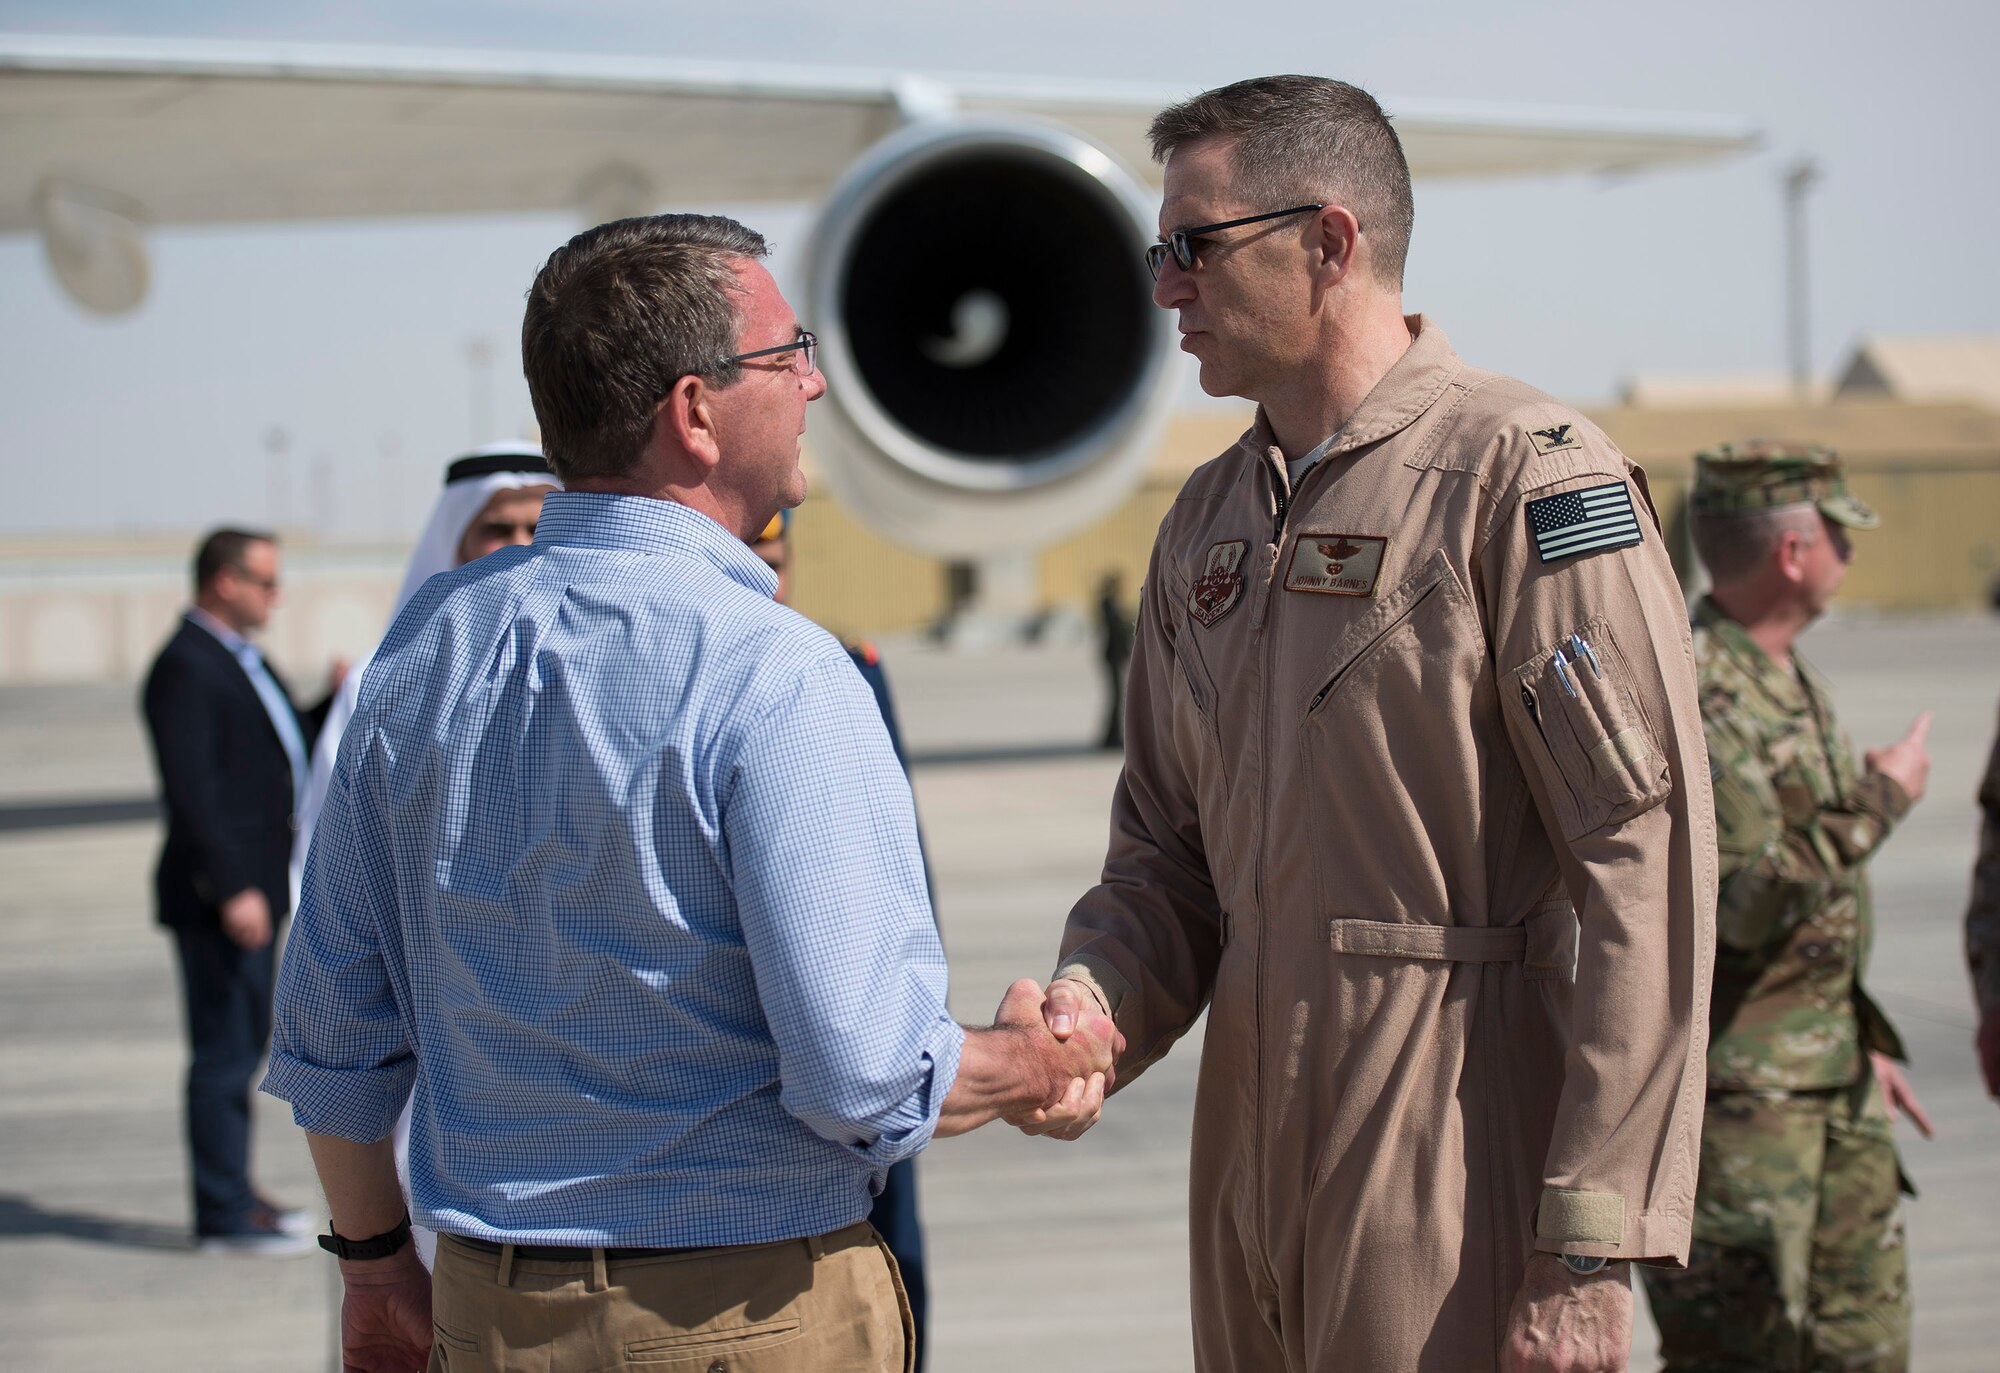 U.S. Air Force Col. Johnny Barnes, 380th Air Expeditionary Wing vice commander, greets U.S. Secretary of Defense Ash Carter at an undisclosed location in Southwest Asia, April 16, 2016. Secretary Carter visited the region to speak with service members about their role in accelerating the lasting defeat of ISIL. (U.S. Air Force photo by Staff Sgt. Chad Warren)